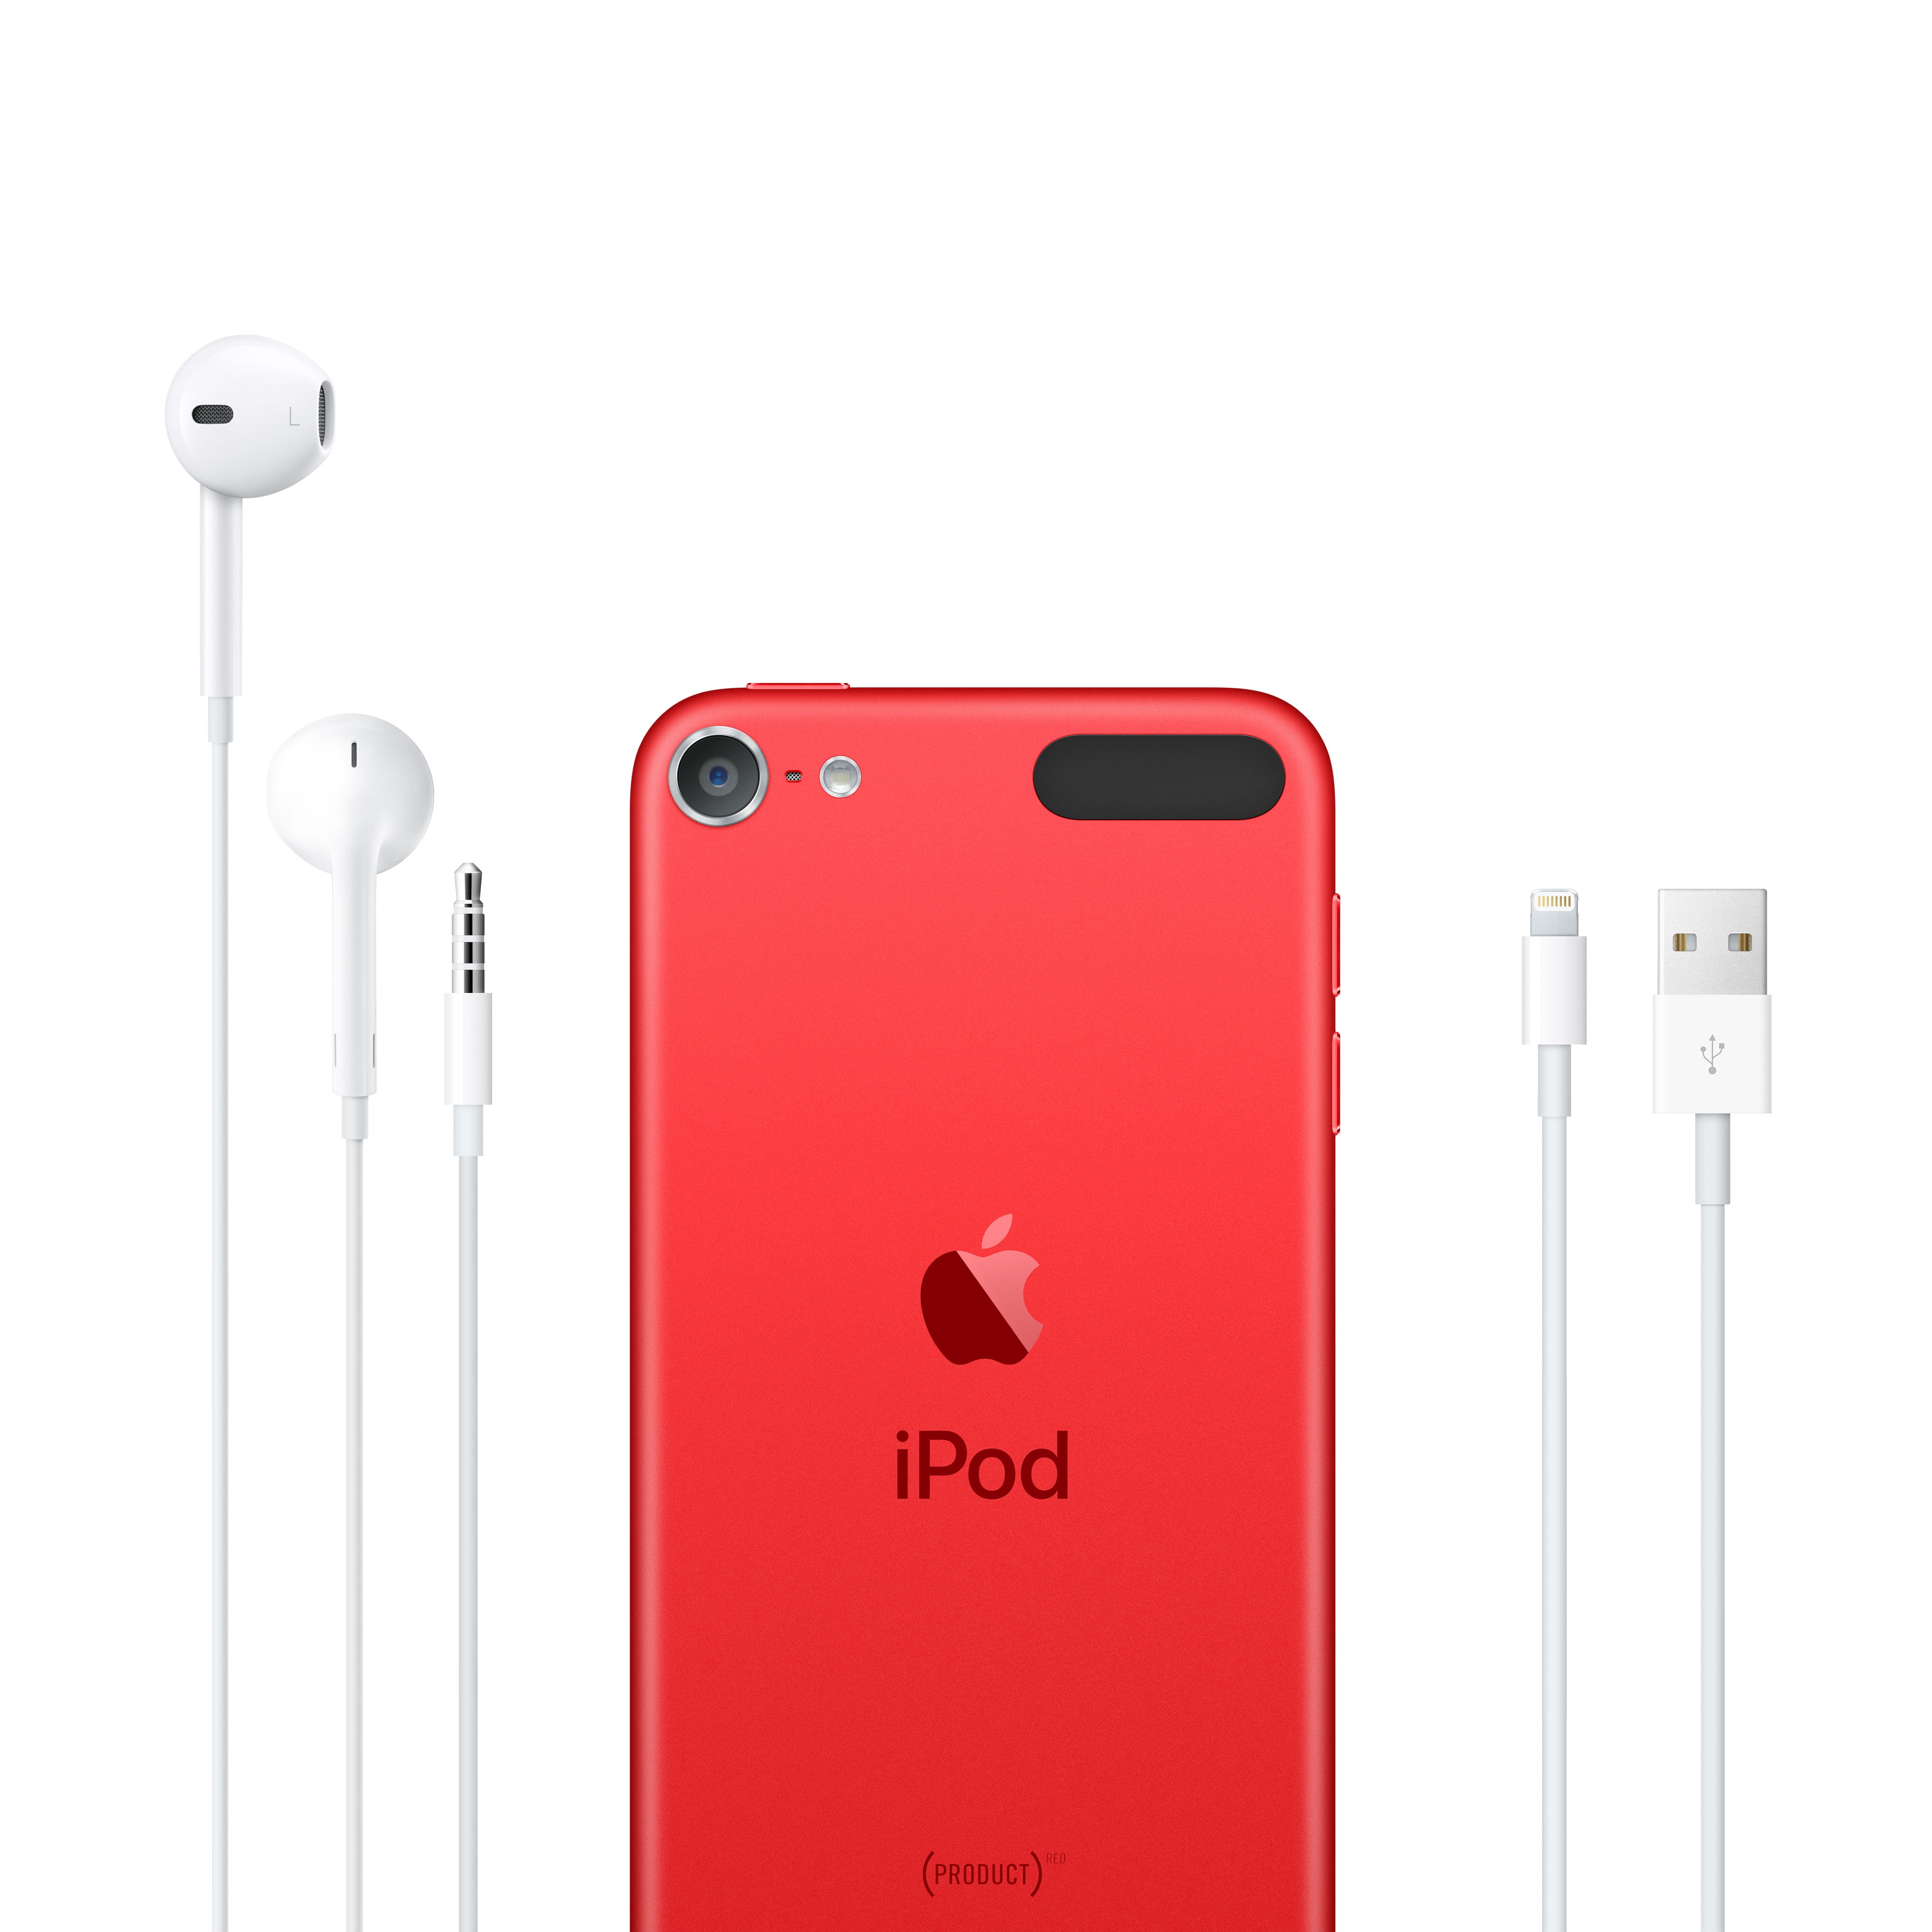 Apple iPod touch 7th Generation 256GB - PRODUCT(RED) (New Model